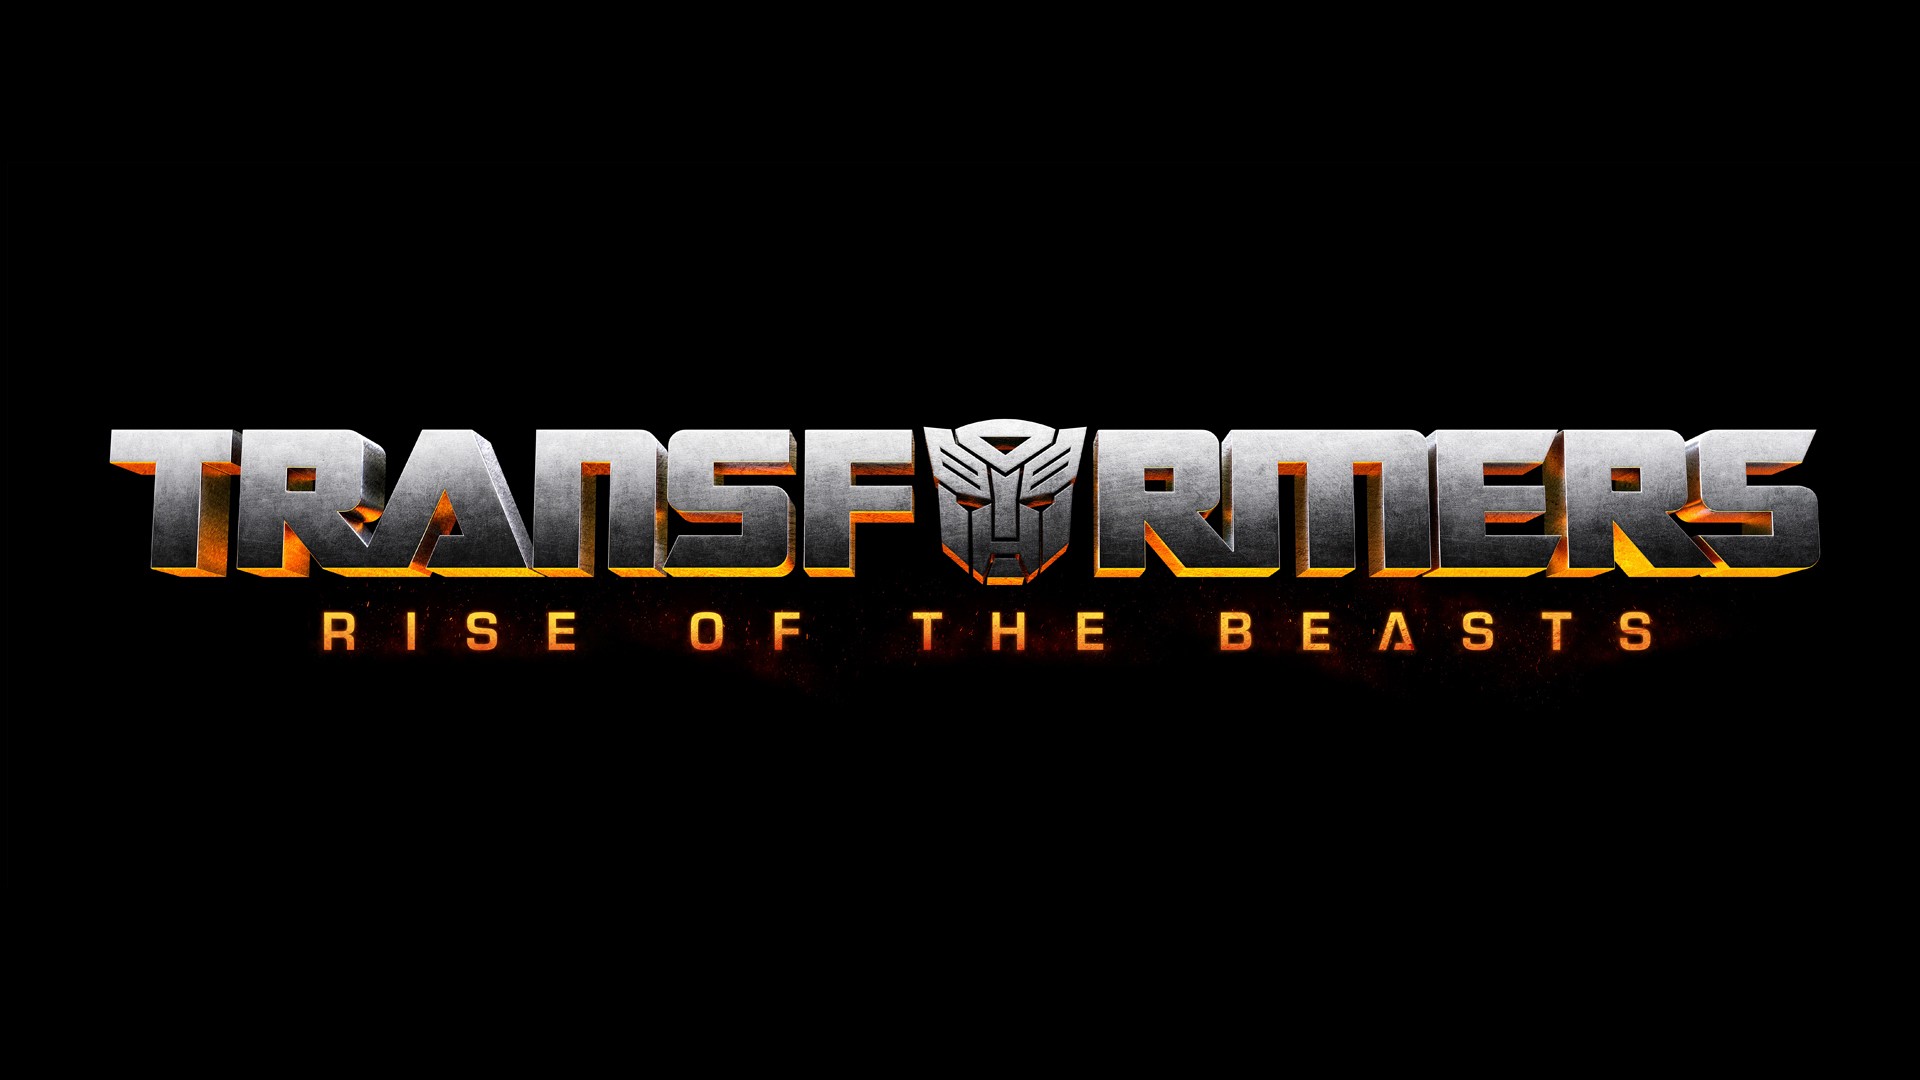 Paramount and Hasbro's Transformers: Rise of the Beasts